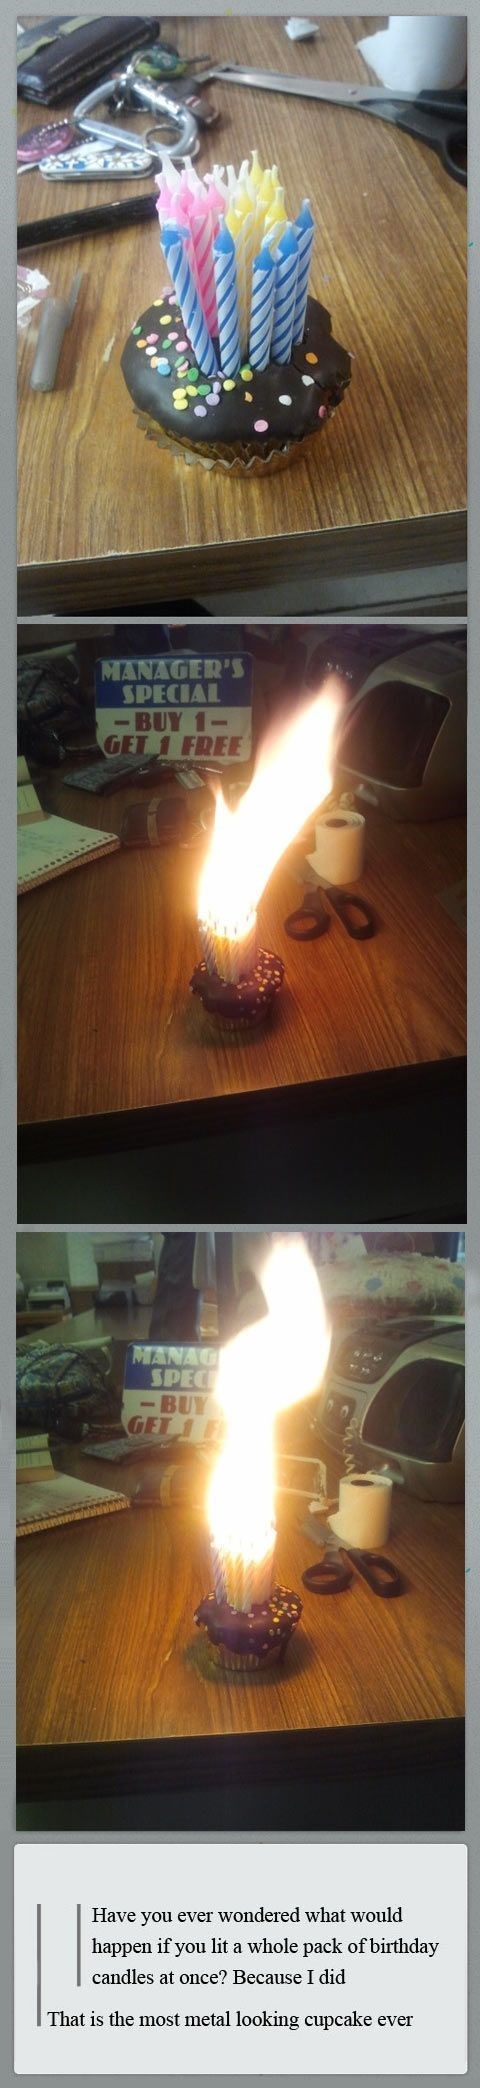 birthdays funny tumblr posts - Manager'S Special Buy 1 Get 1 Free Manag Spec Buy Get 1 Have you ever wondered what would happen if you lit a whole pack of birthday candles at once? Because I did That is the most metal looking cupcake ever